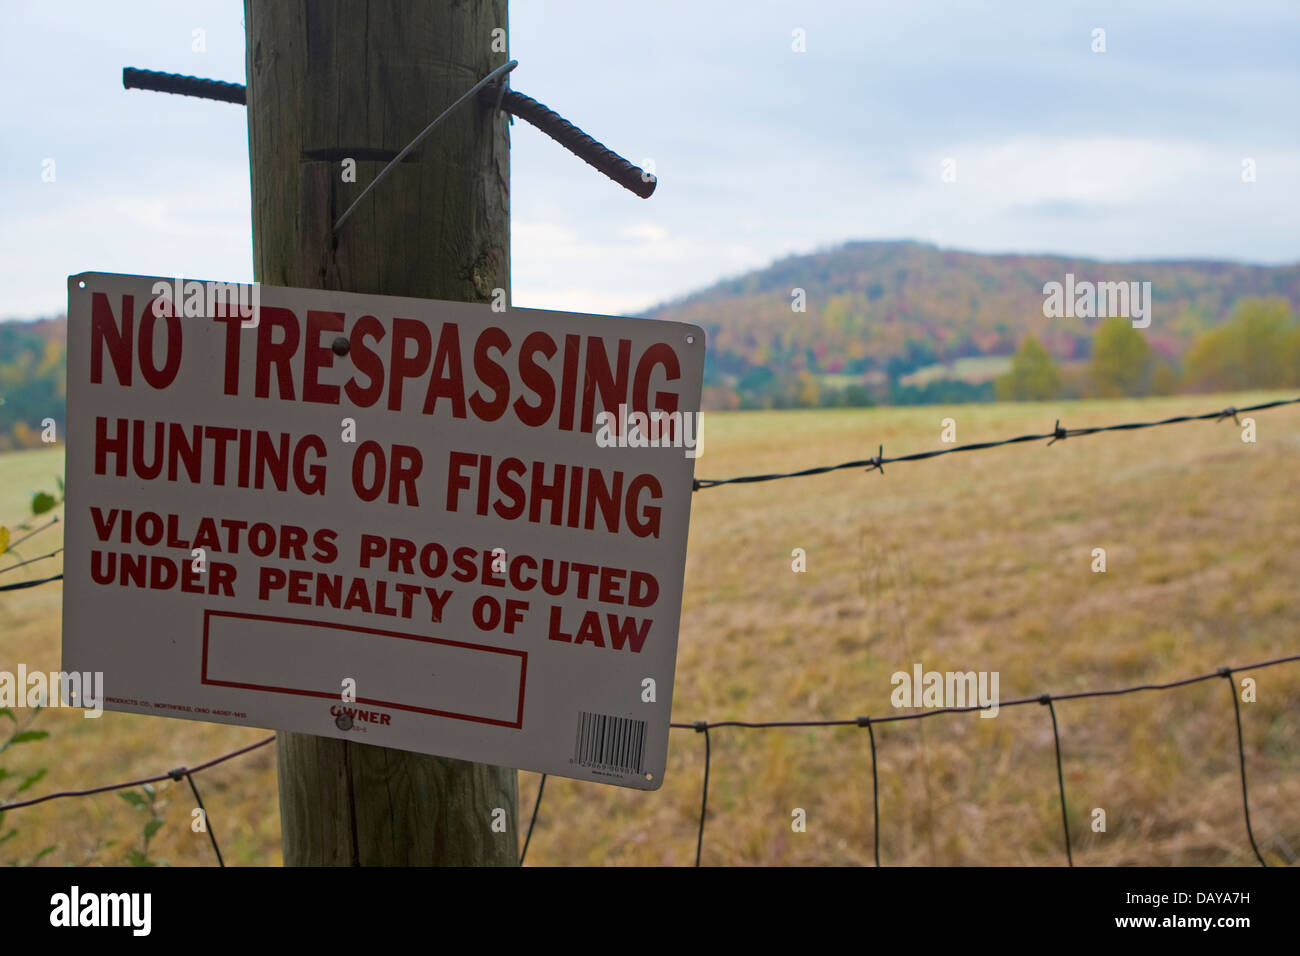 No Tresspassing sign on a fence with barbed wire in front of a field and mountain, Virginia, United States of America Stock Photo